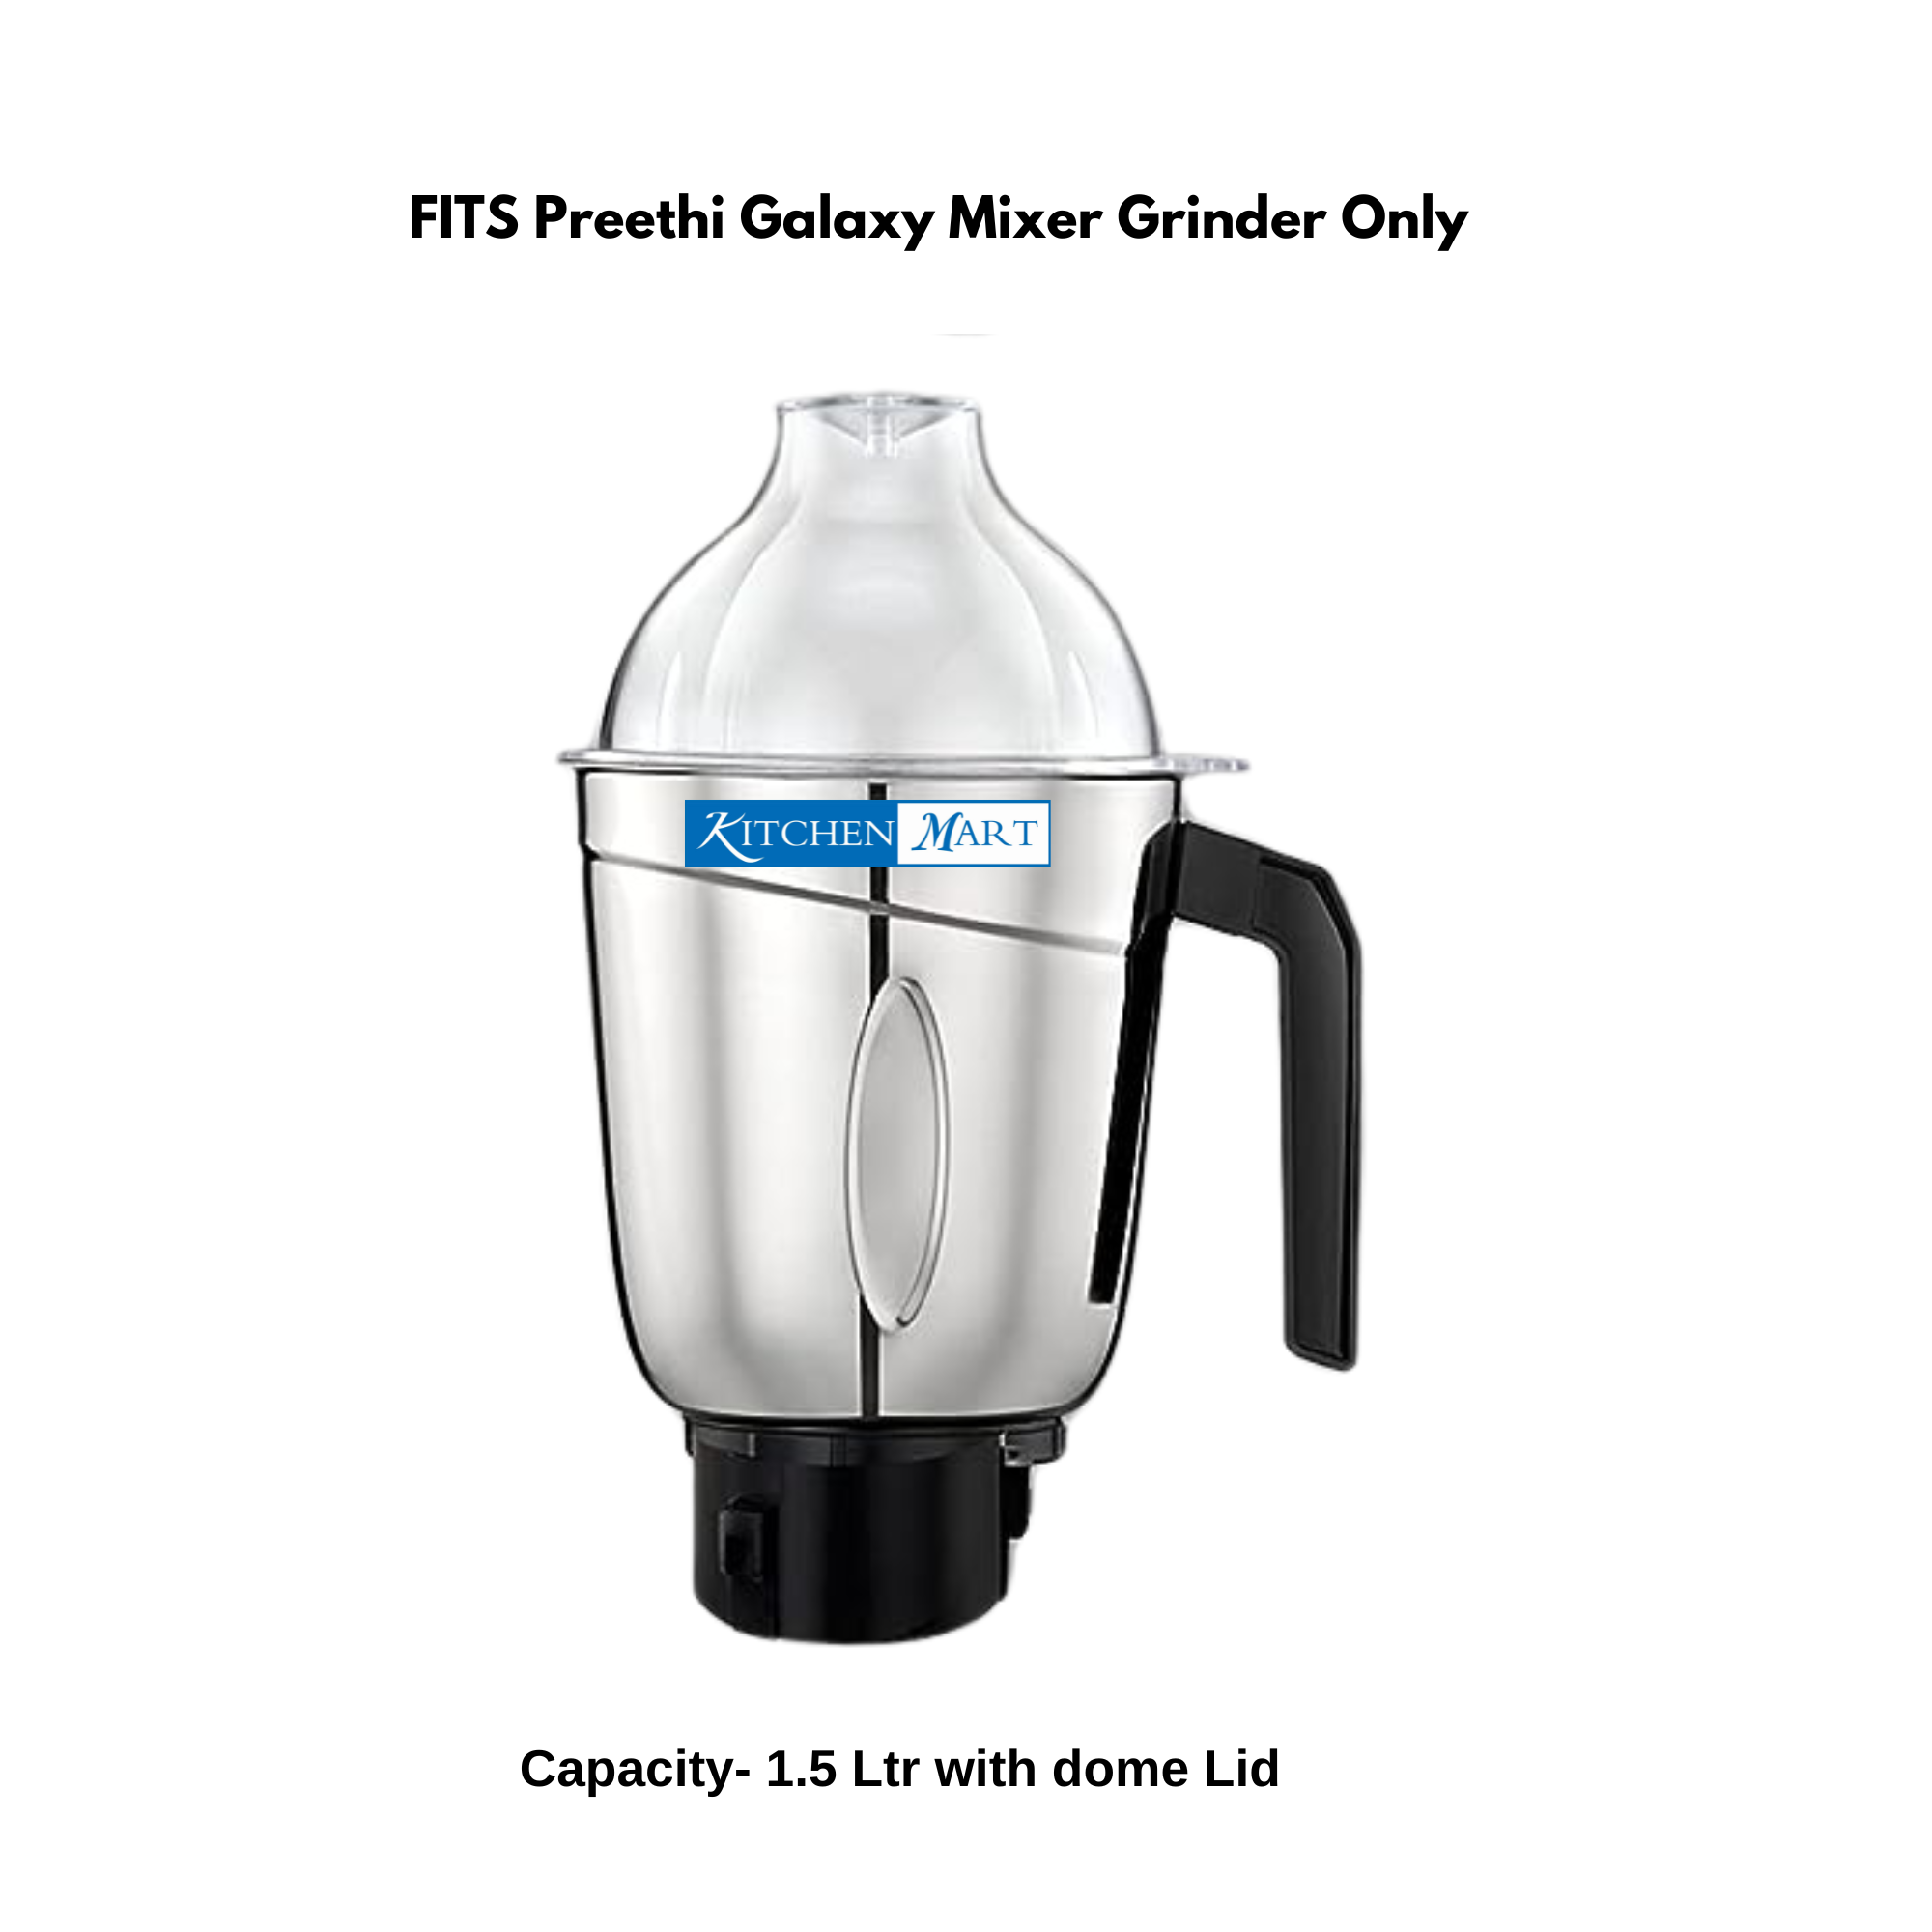 Replacement Big Jar 1500ml with Dome lid for Preethi Galaxy Mixer Grinder